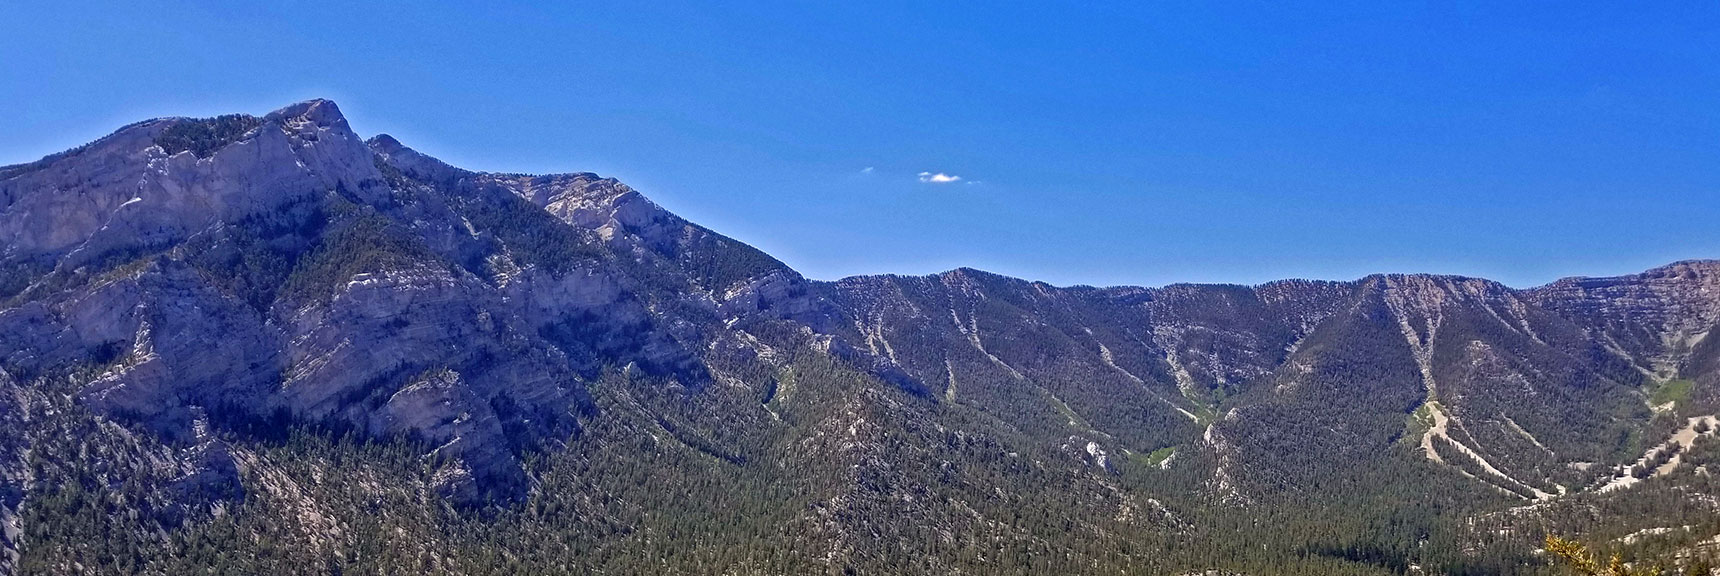 Foxtail Canyon Approach. Turn Left at Kyle Canyon Rim to Ascend Mummy Mountain | Lee Canyon to Kyle Canyon | Potential Routes | Mt Charleston Wilderness | Spring Mountains, Nevada